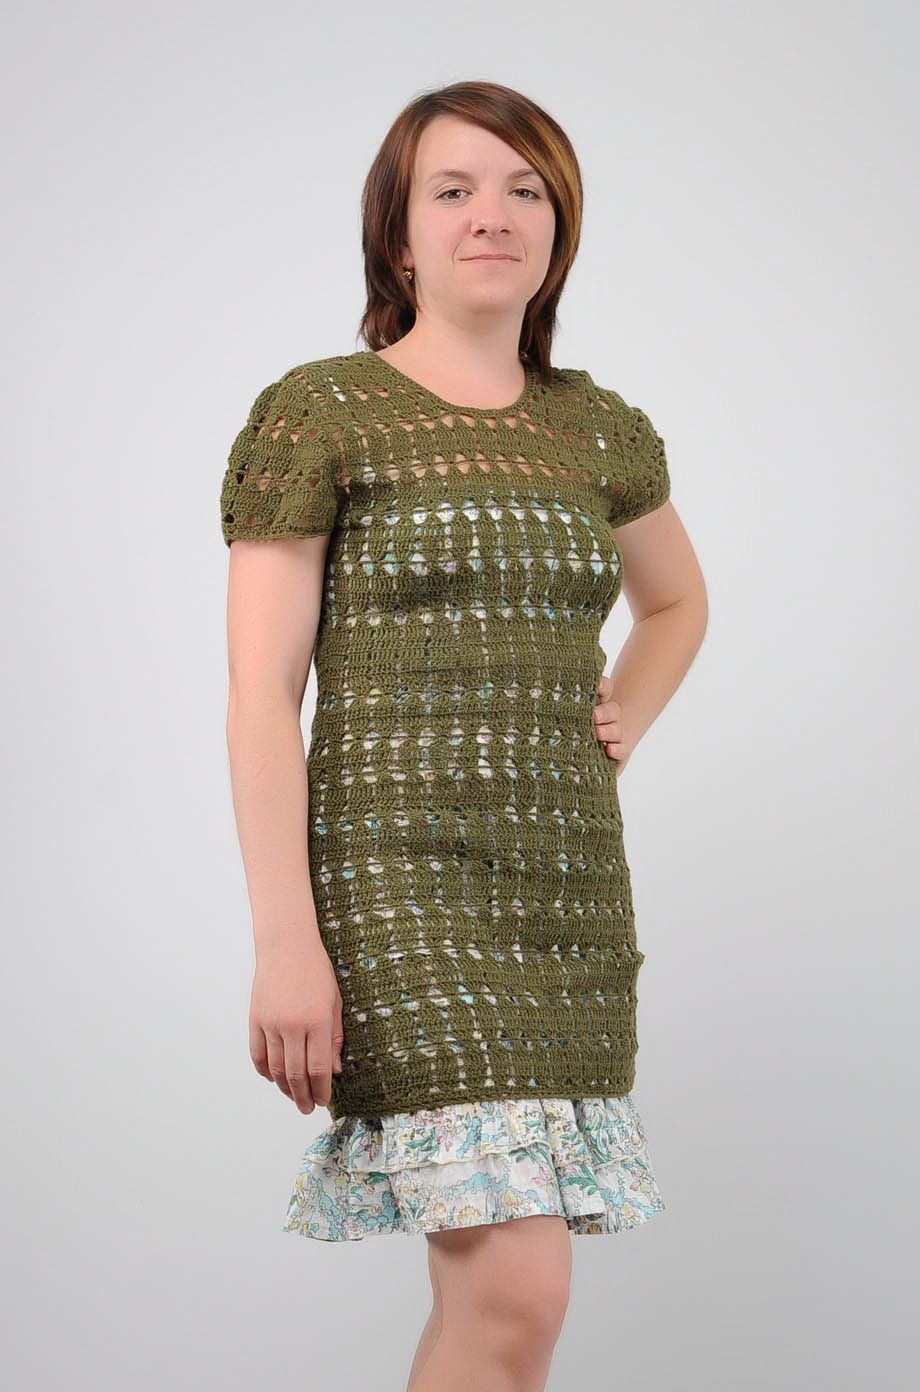 Crocheted tunic of olive color photo 1